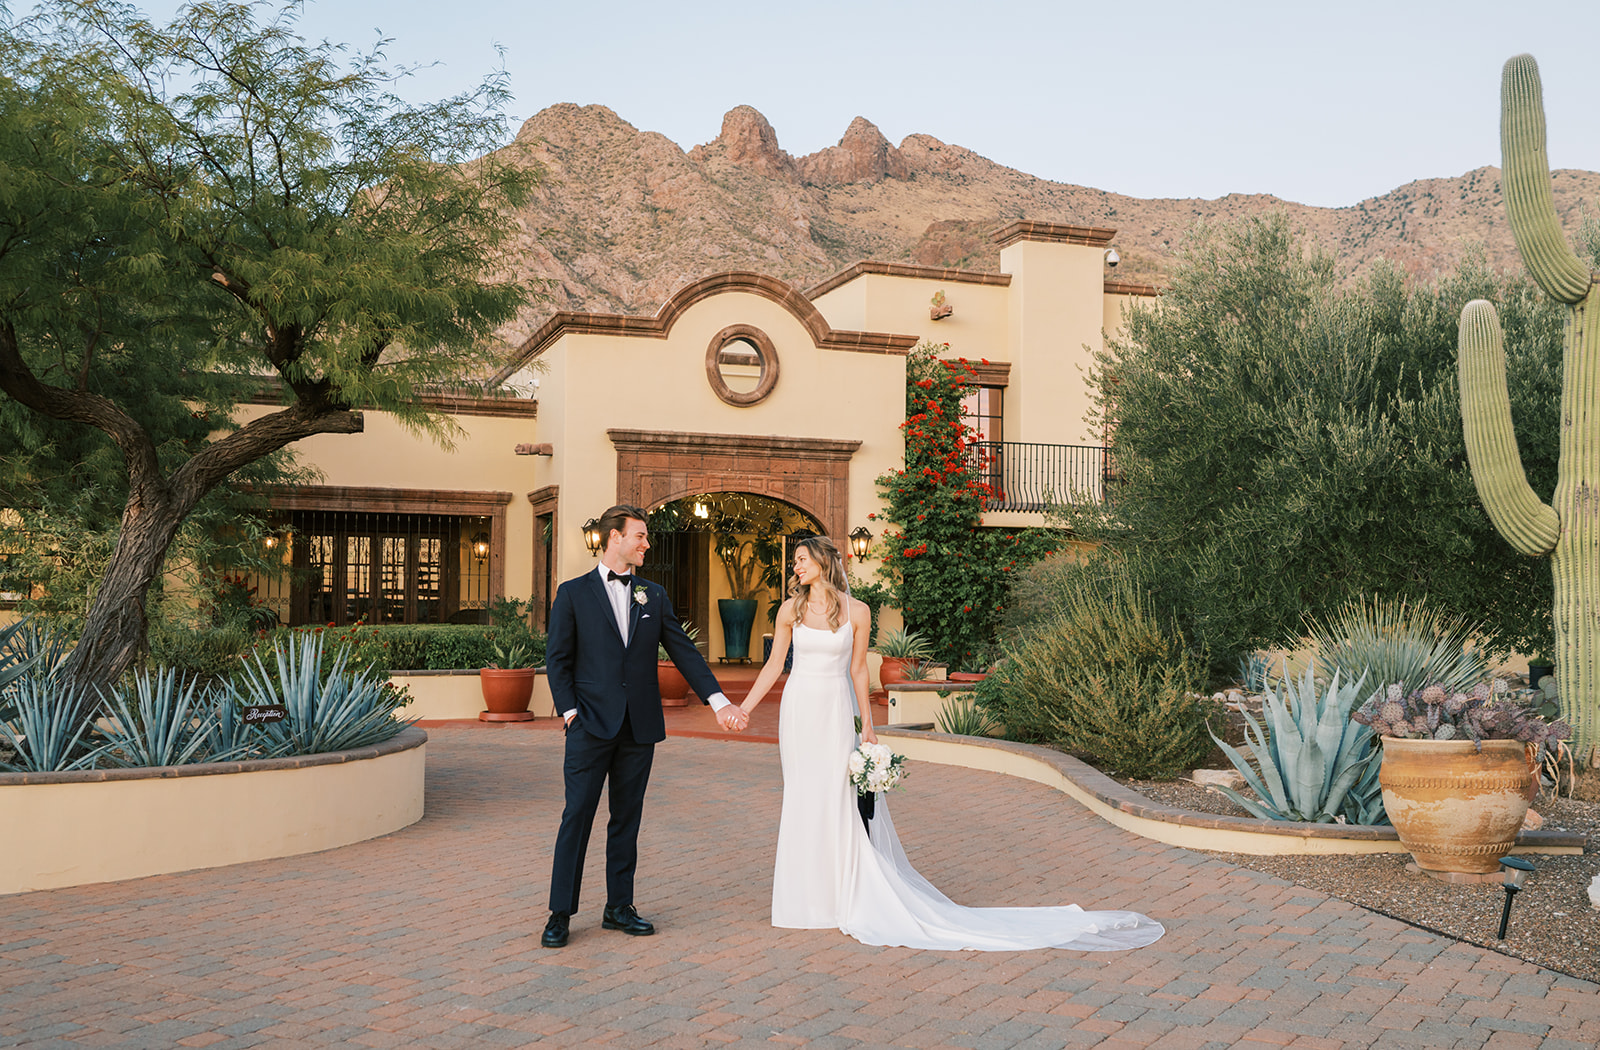 Bride and Groom gets married in this beautiful custom home in Tucson, Arizona 